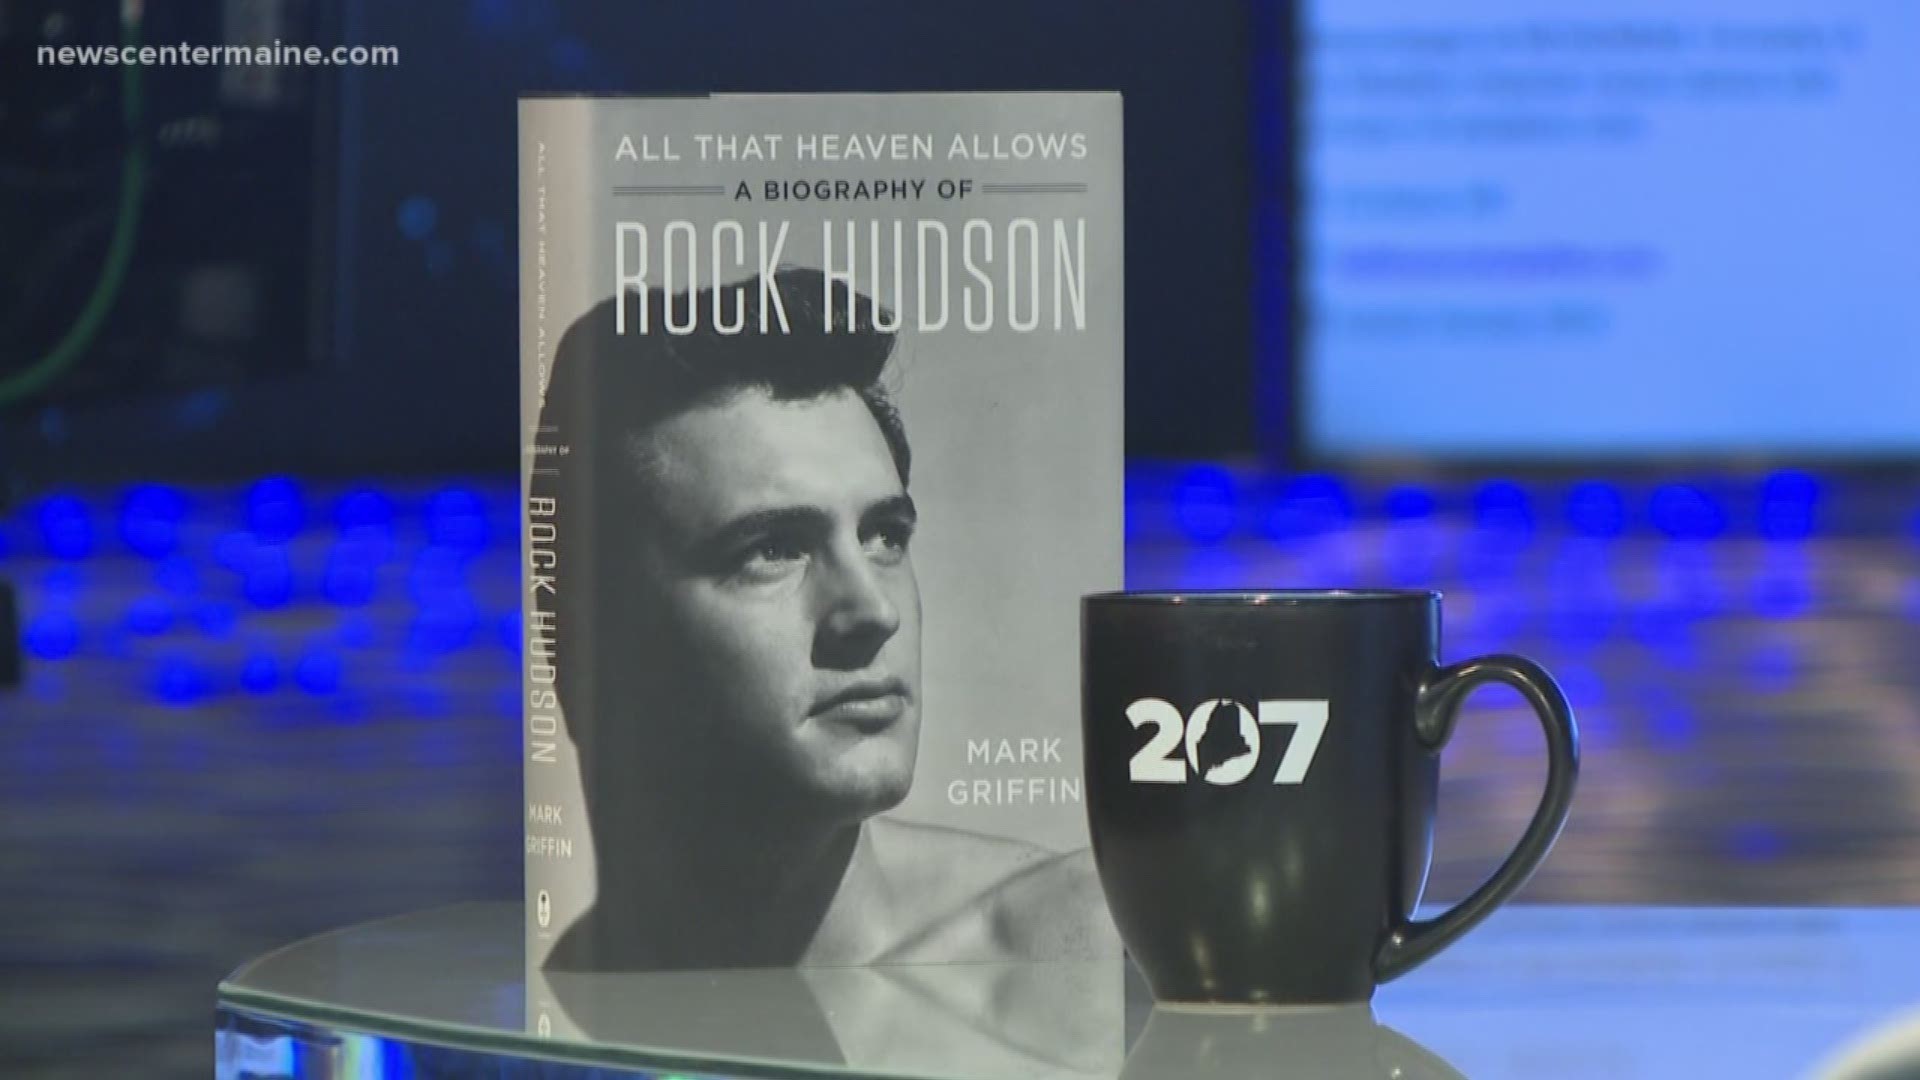 Mark Griffin is a Maine author that delved deep into the archives to reveal the real Rock Hudson. He talks with us about his new book, All That Heaven Allows.